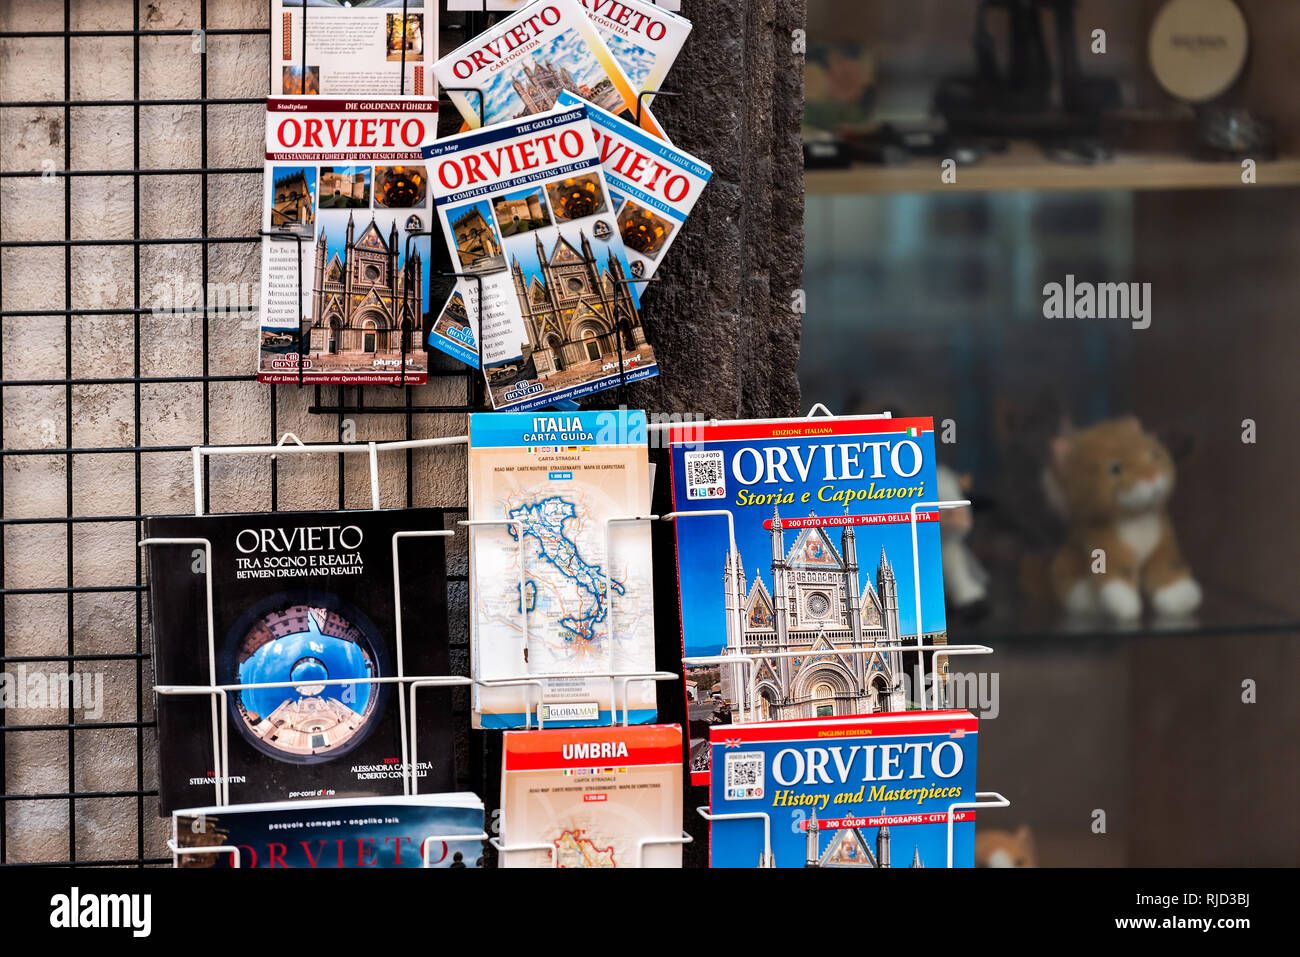 Orvieto, Italy - September 3, 2018: Closeup of shopping souvenirs and map tour travel guide in small Italian town city street vendor retail display Stock Photo